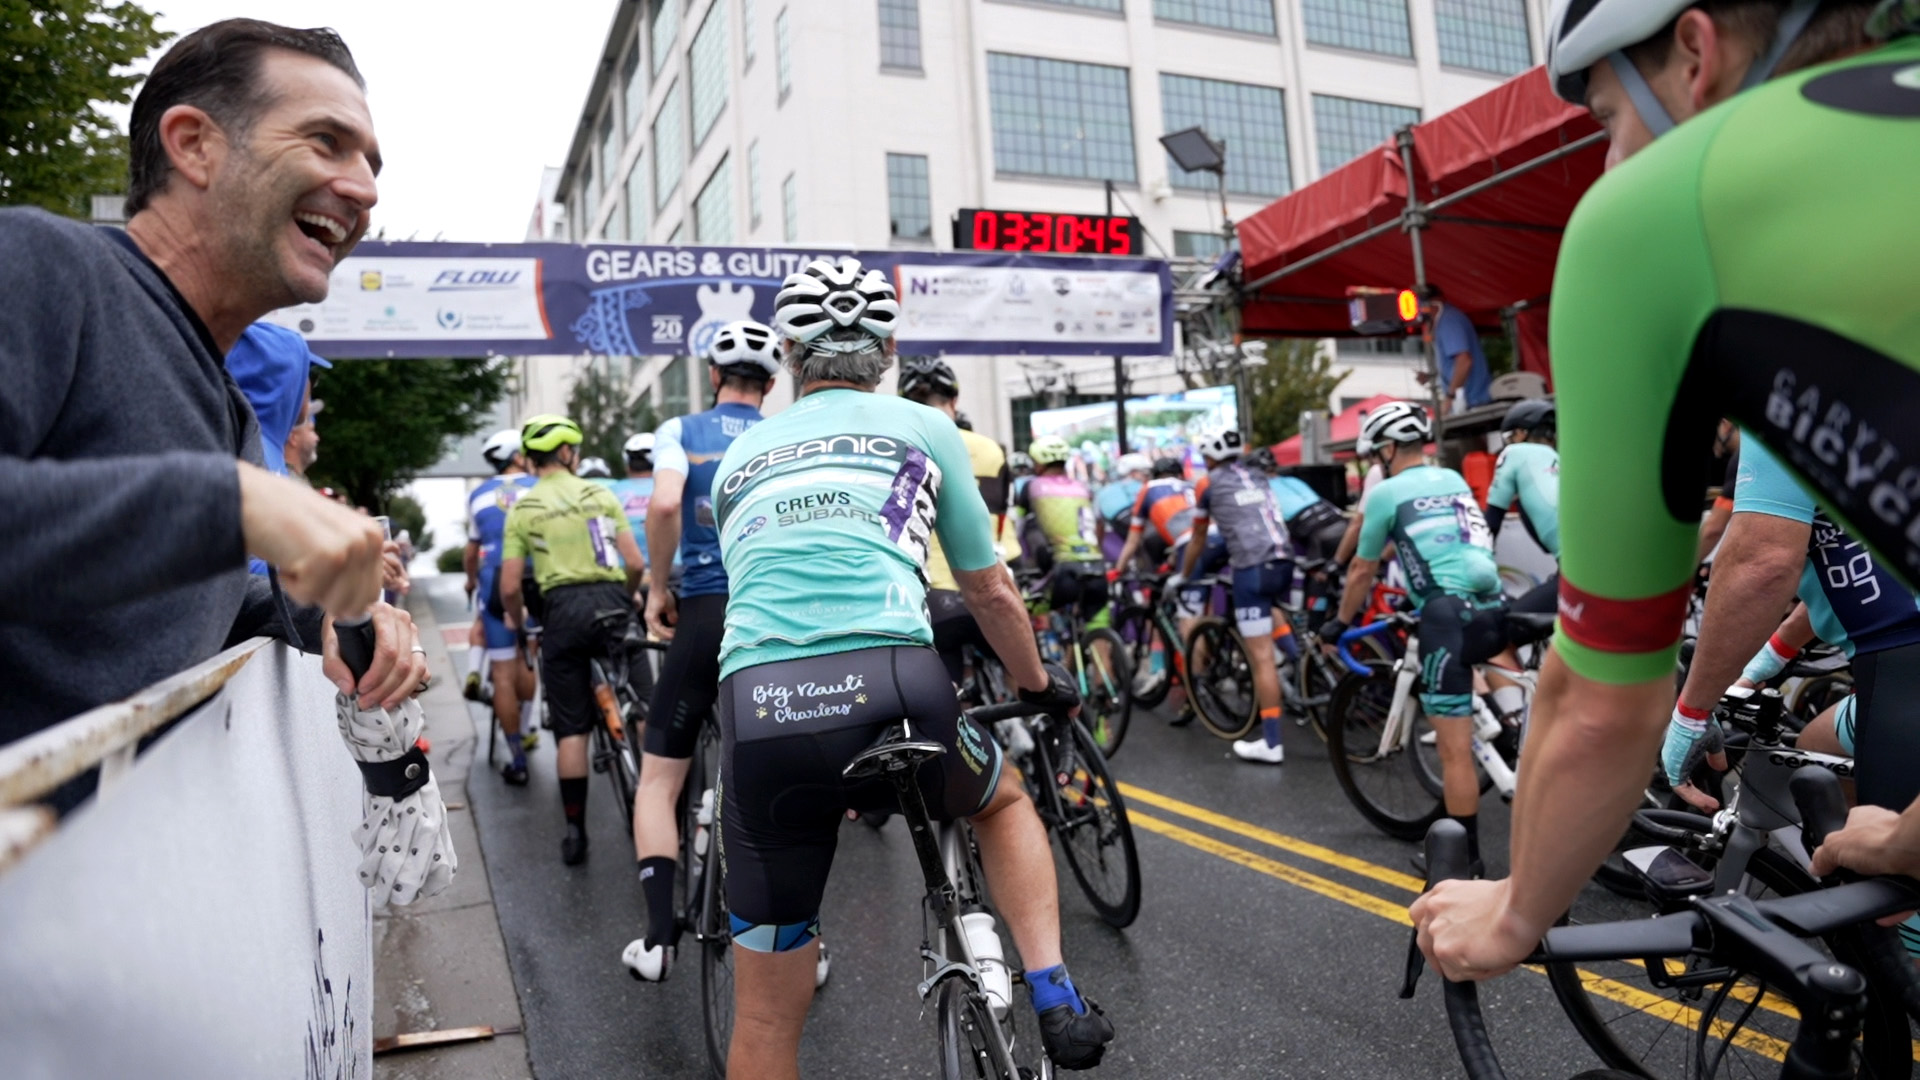 A spectator jokes with a cyclist at the starting line of a race during Winston-Salem's Gears and Guitars festival.